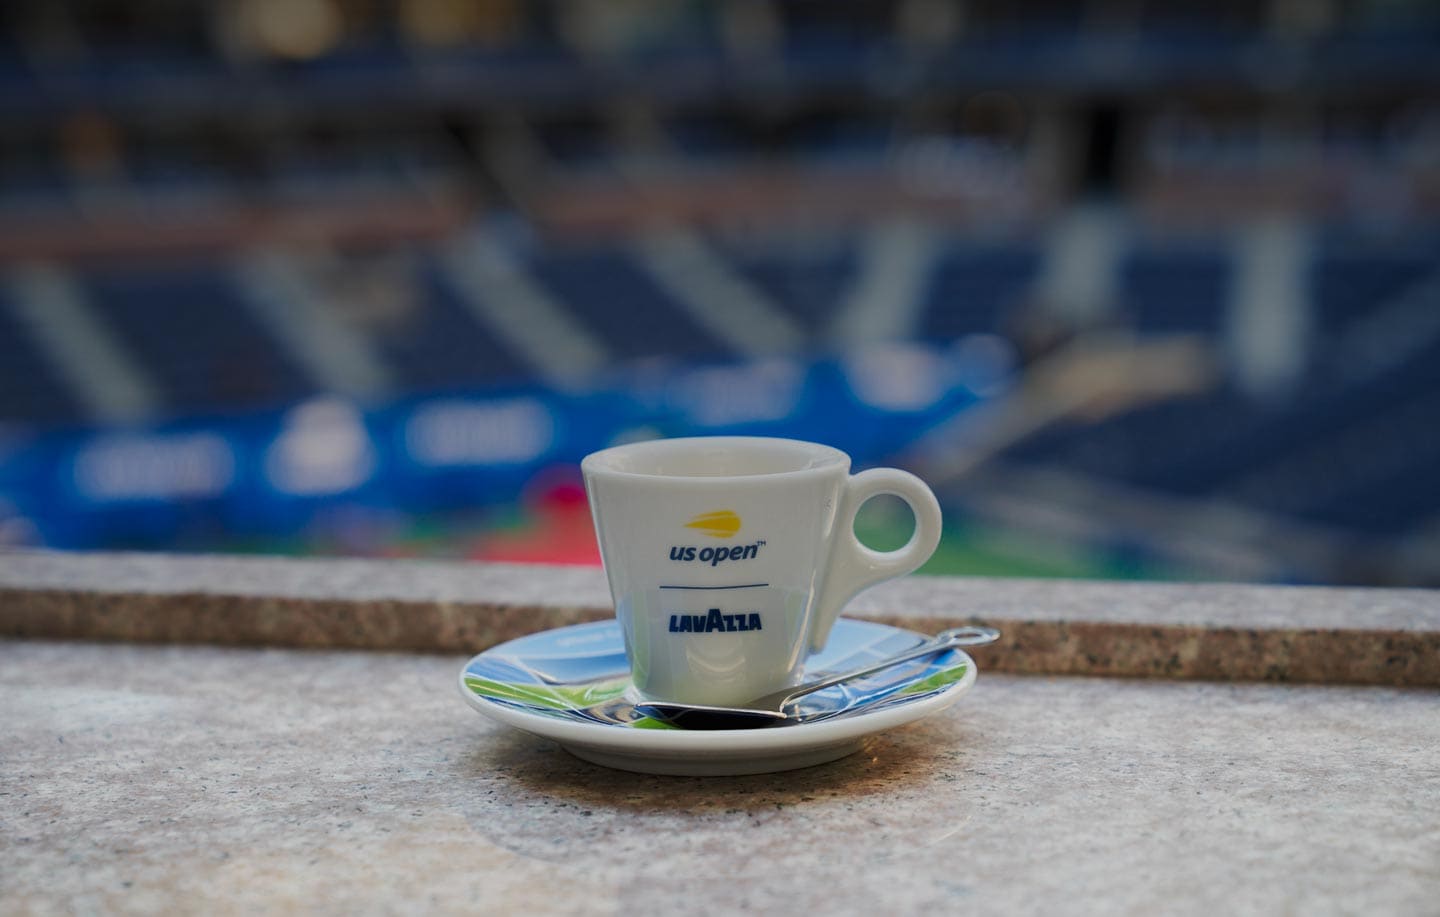 Courting Excellence - Lavazza and the U.S. Open